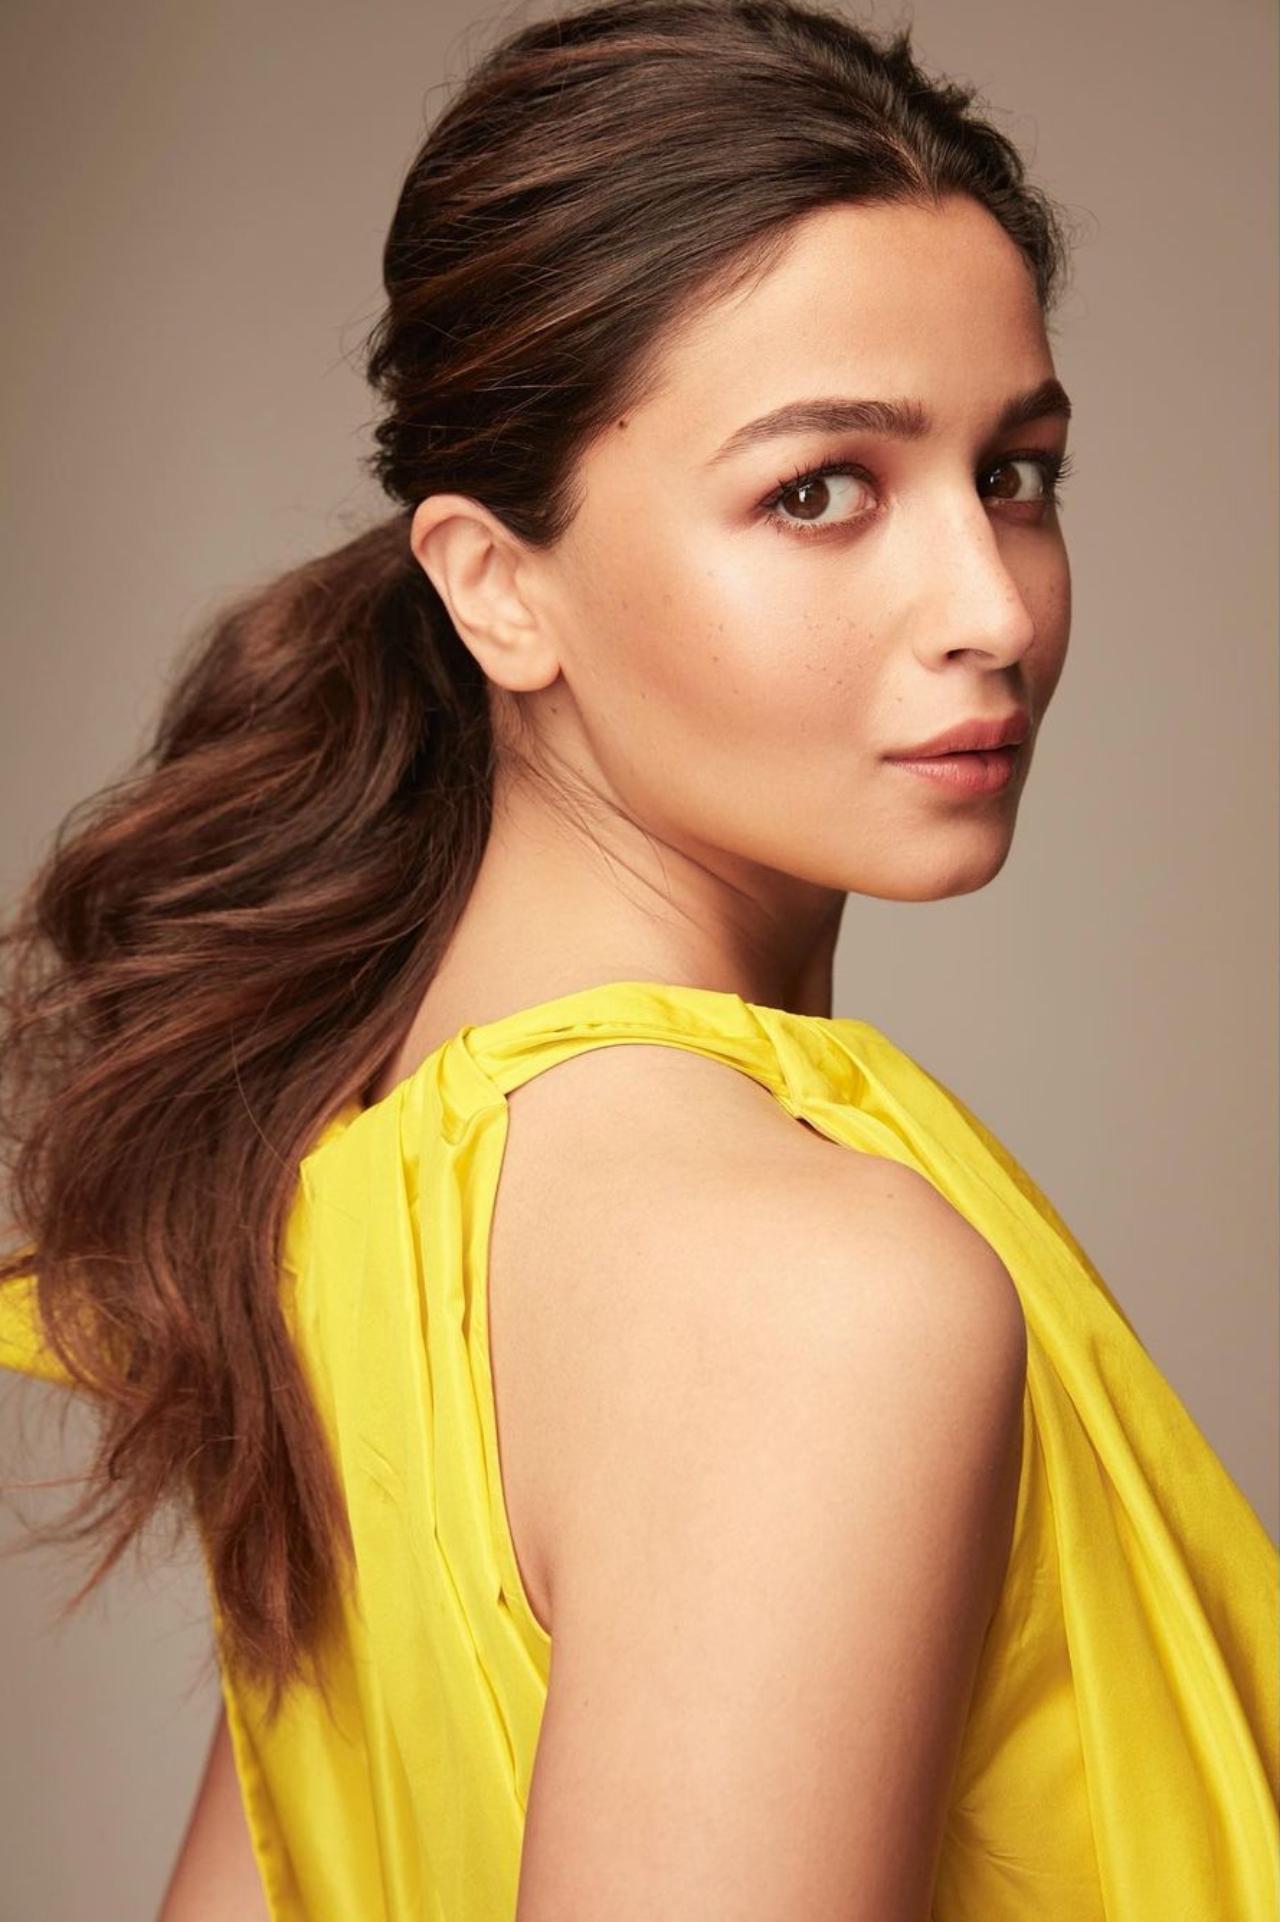 Alia Bhatt Sex Photos - Pics: Alia Bhatt aces her maternity look in a bright yellow dress at the  trailer launch of 'Darlings'